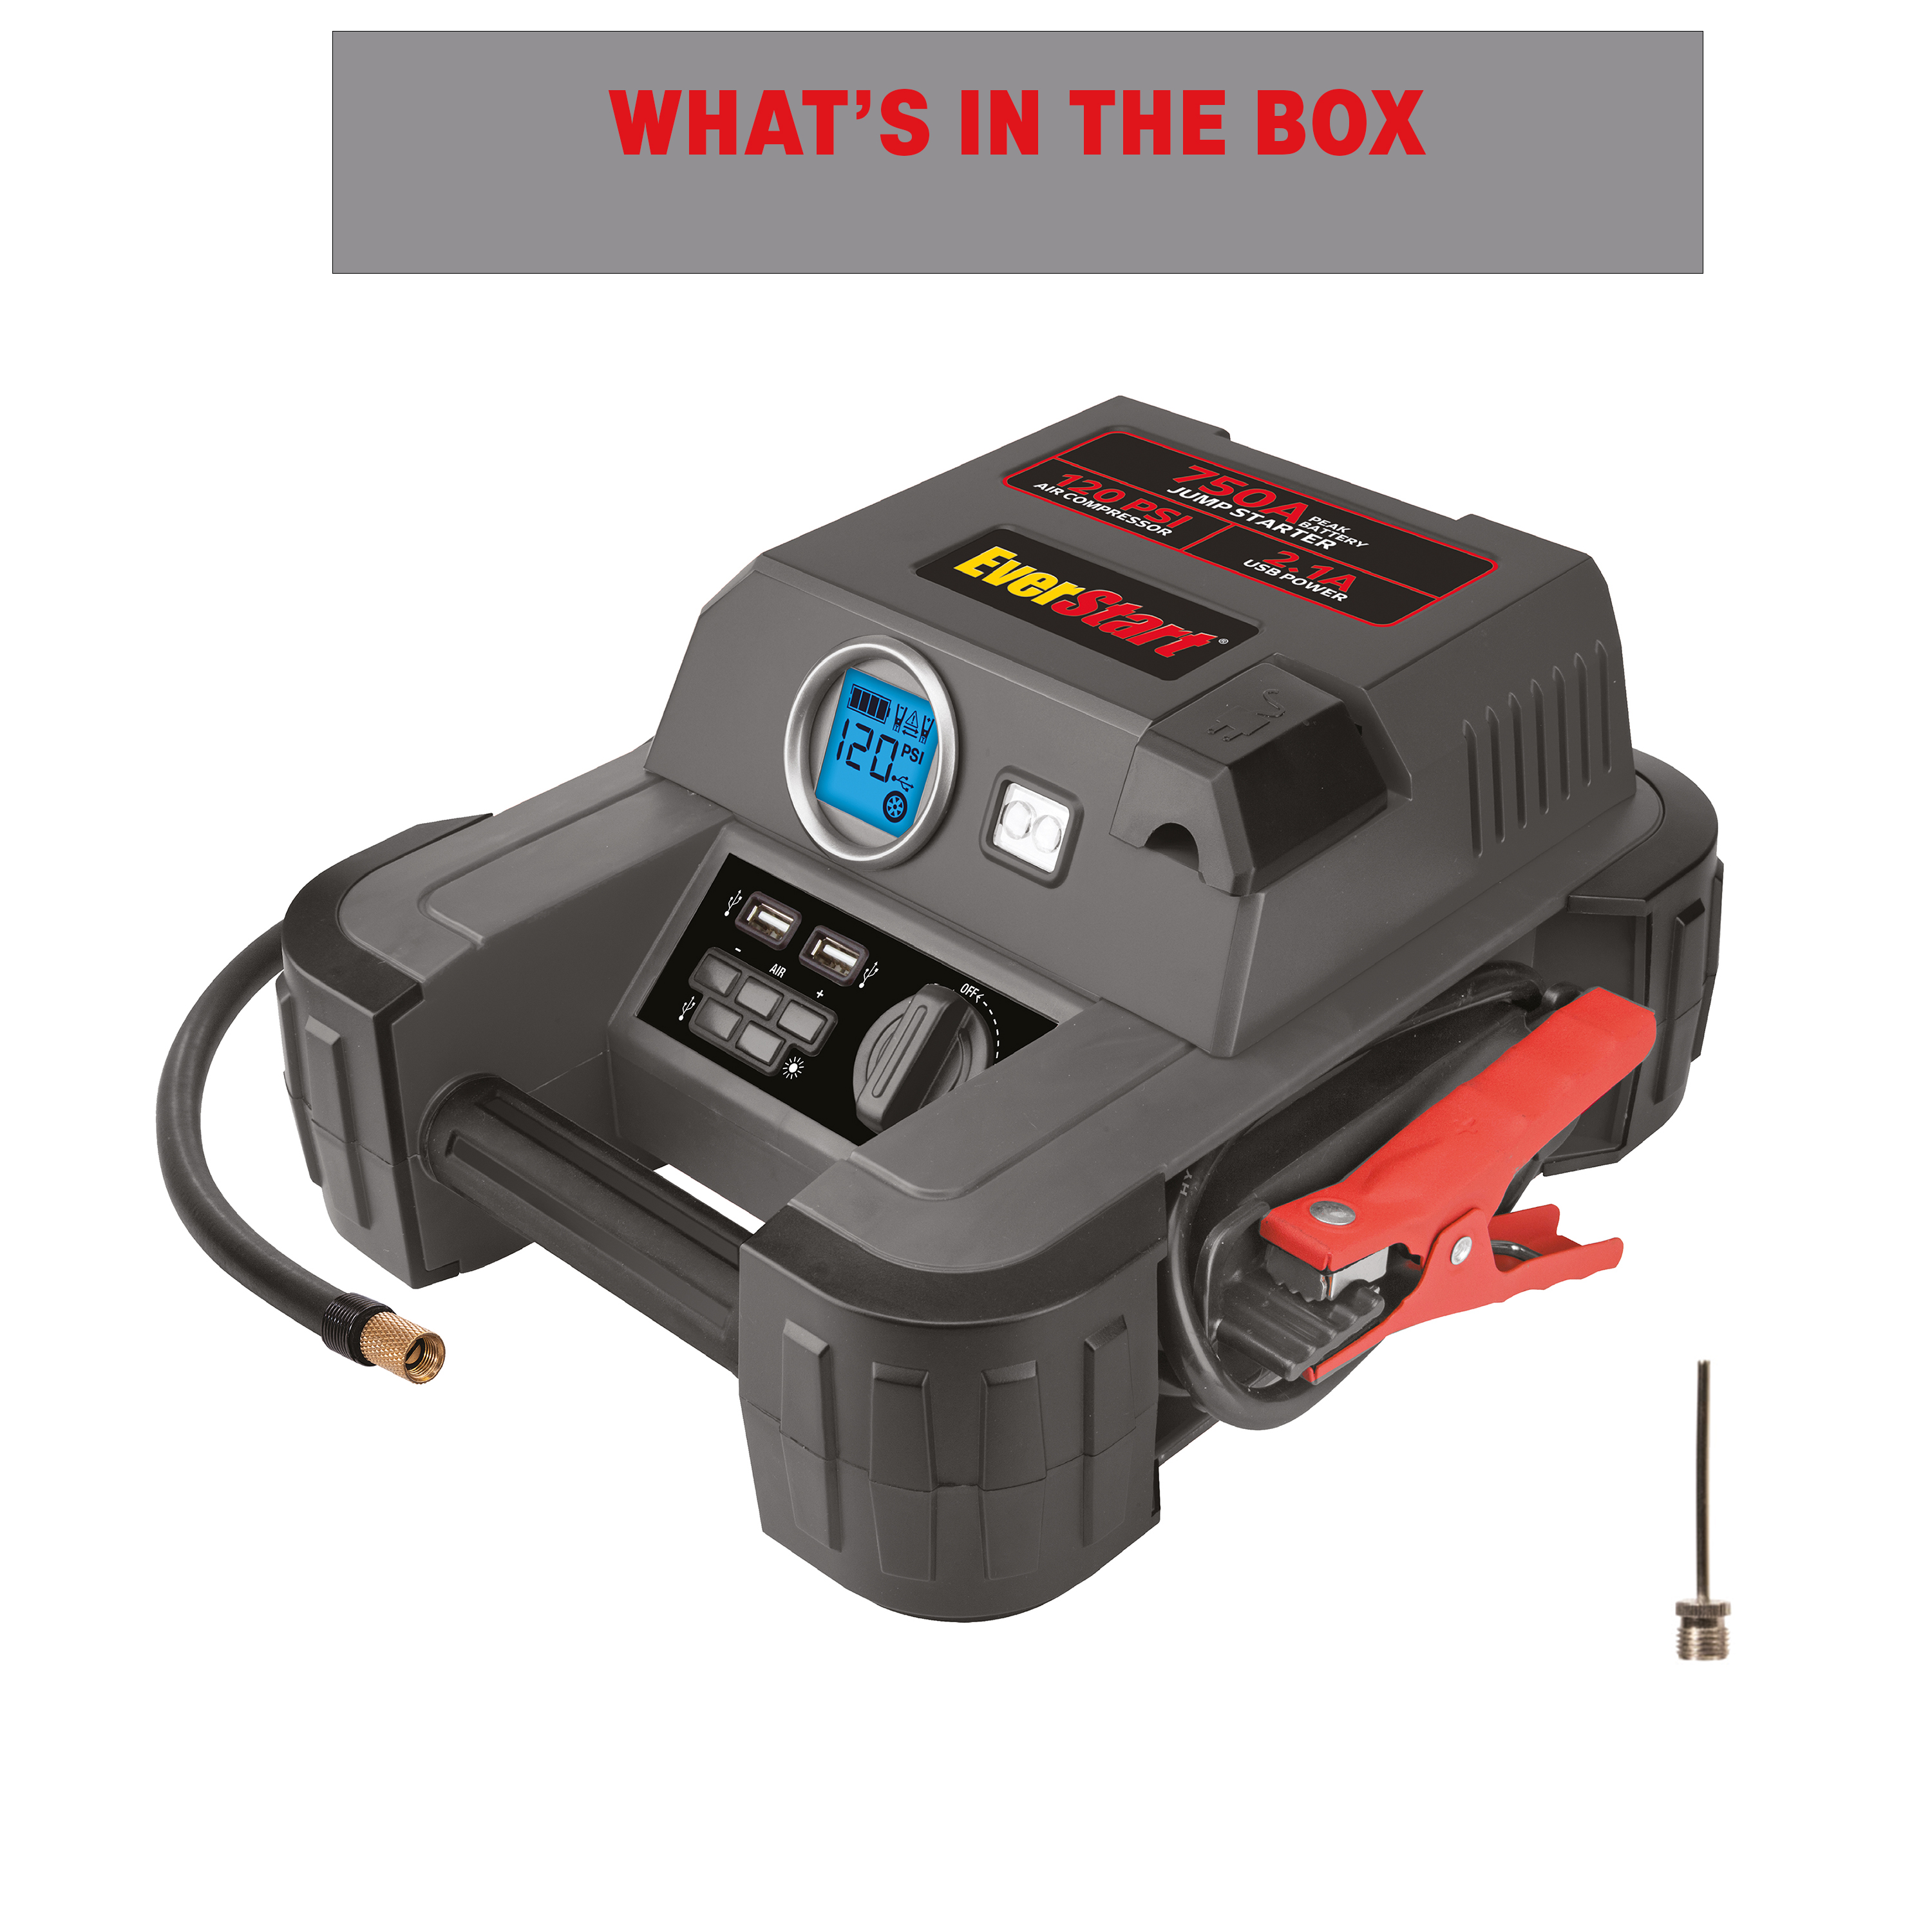 EverStart 750A Jump Starter with Reverse Polarity Alarm, 120 PSI Digital Compressor, Clamps Included - image 5 of 6